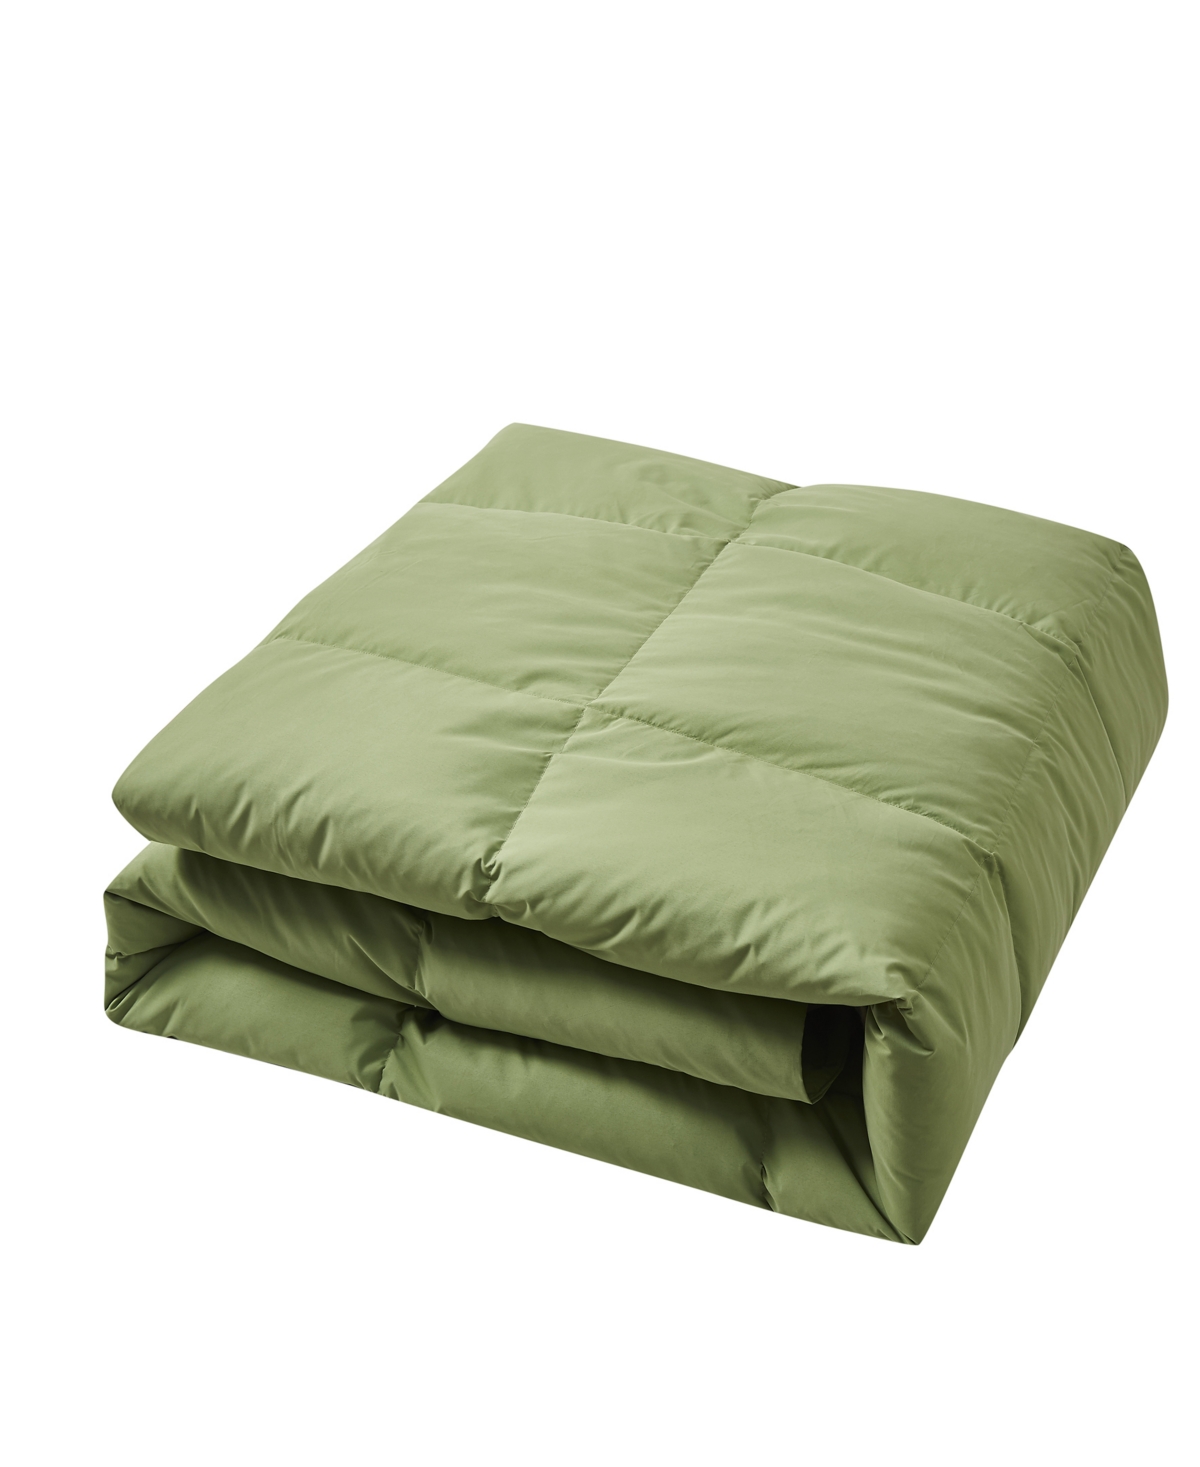 Beautyrest Microfiber Colored Feather & Down Comforter, King In Sage